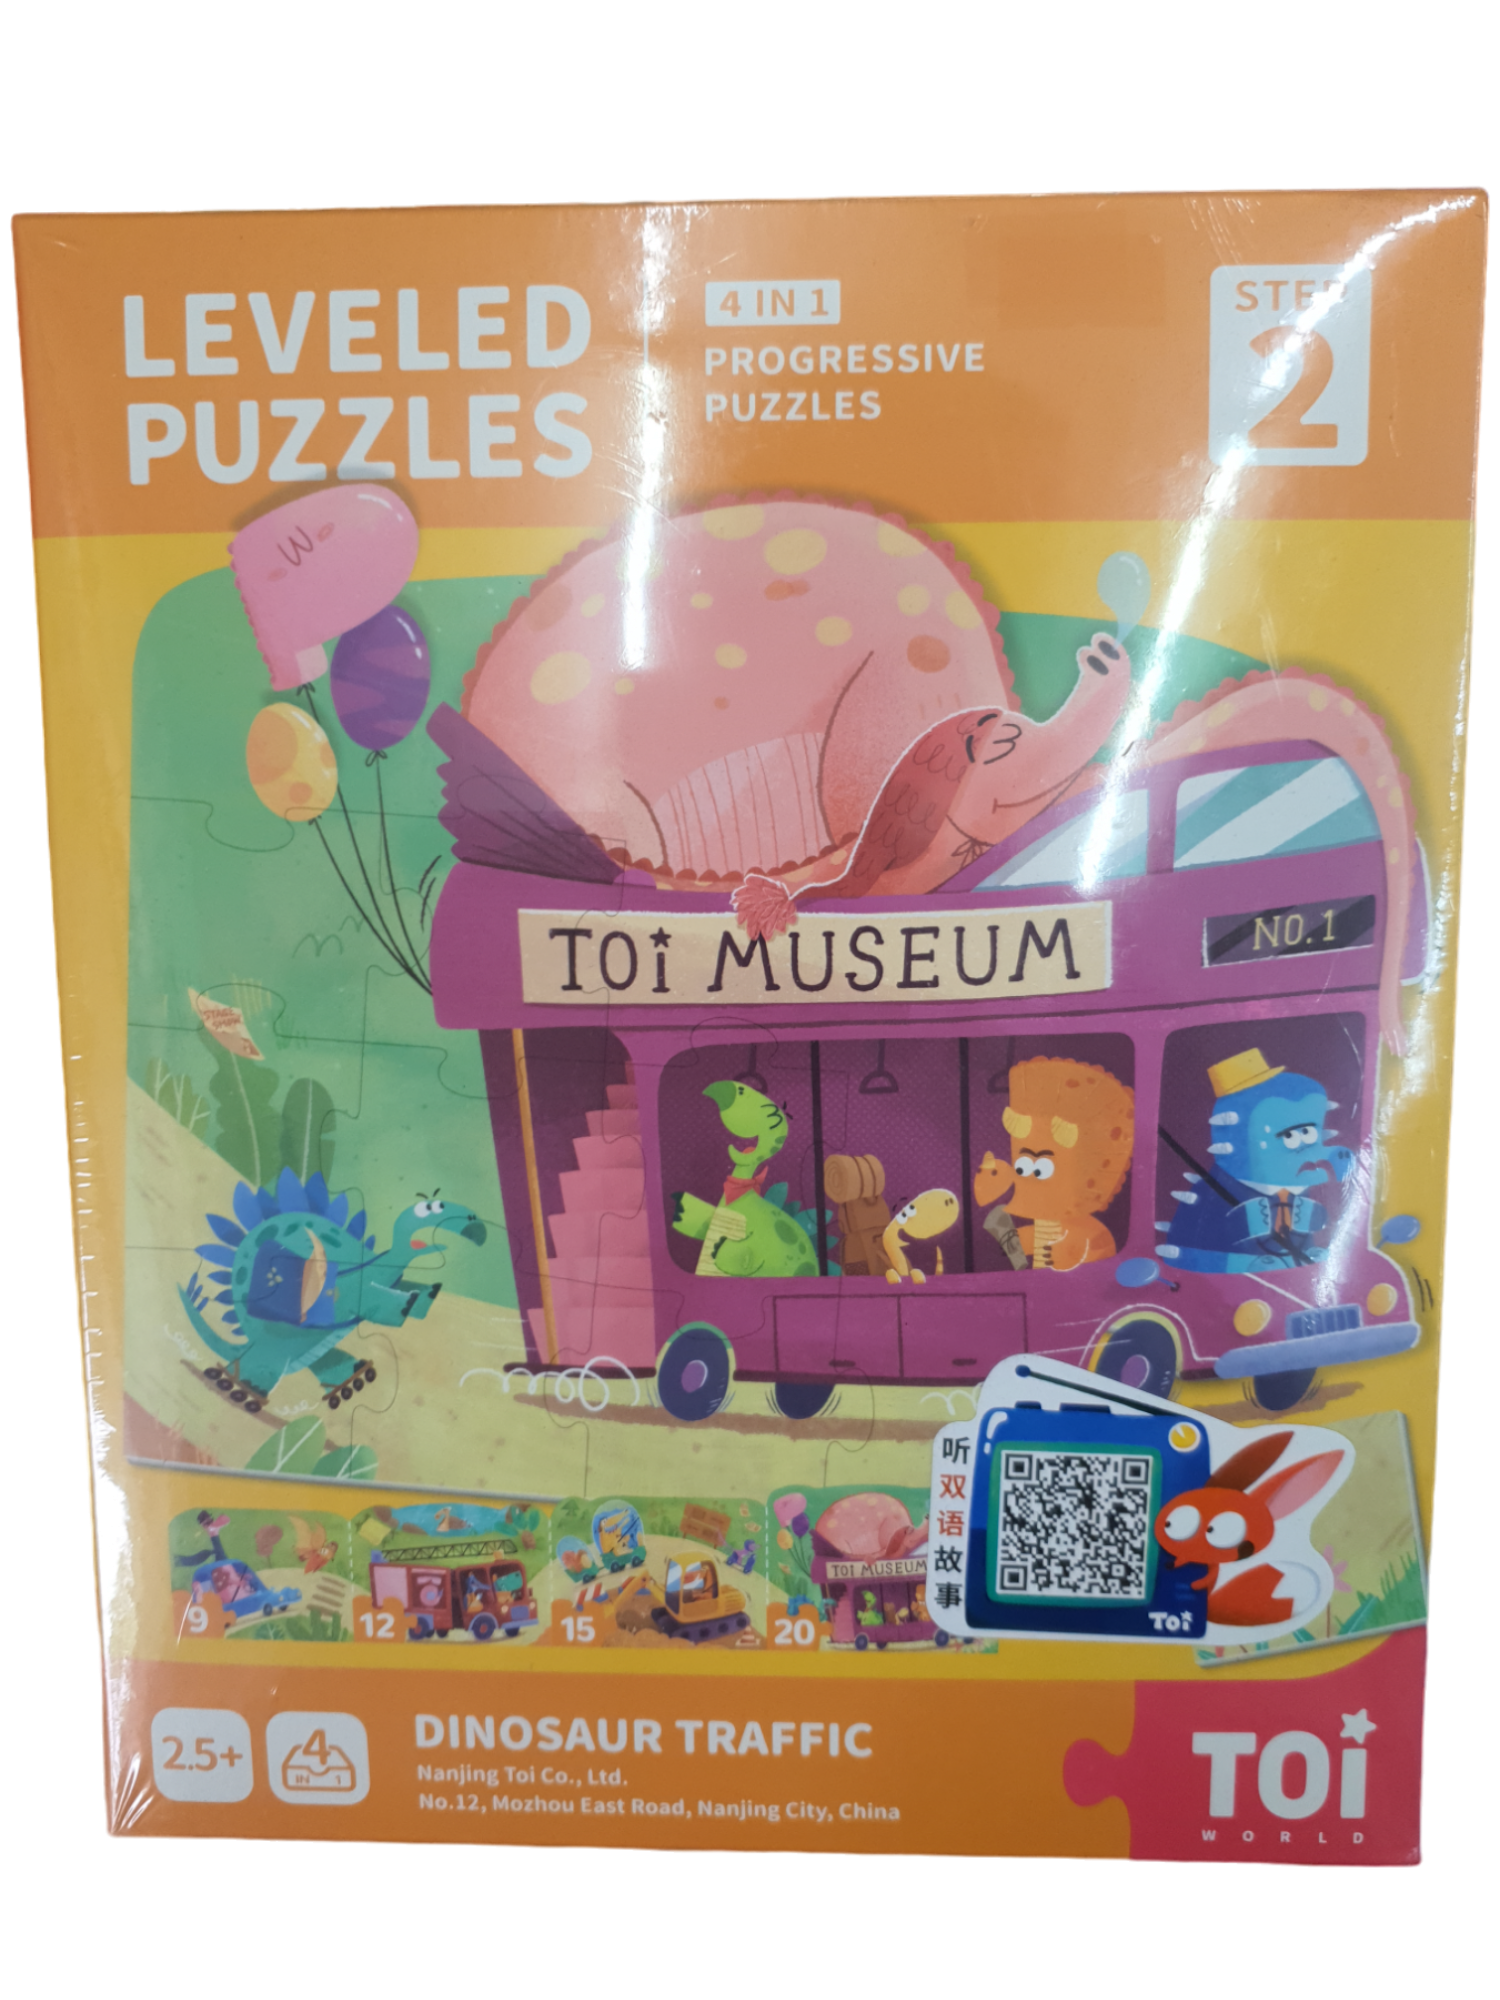 TOI WORLD LEVELED PUZZLES STEP 2 4IN1